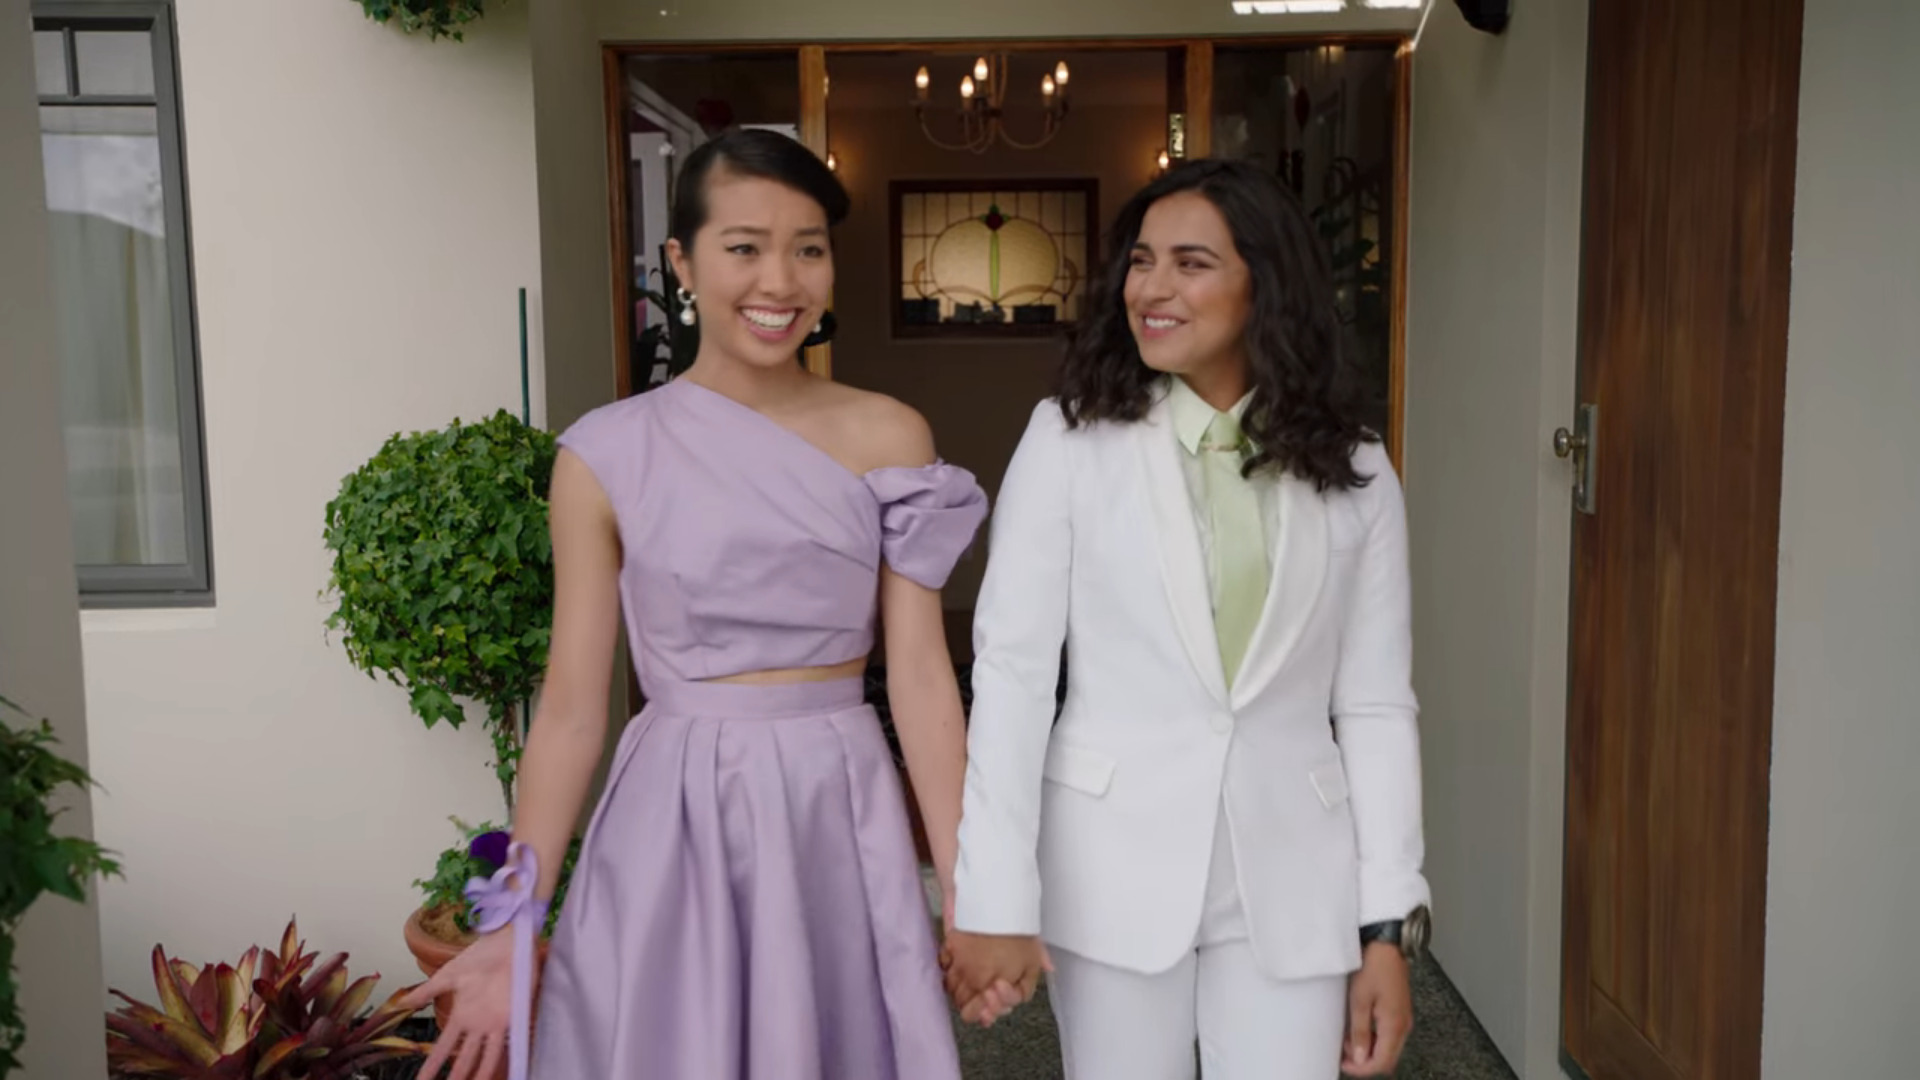 Izzy (Tessa Rao) and Fern (Jacqueline Joe) are ready for prom in Power Rangers Dino Fury Season 2 Episode 5 "Stitched Up" (2022), Netflix.